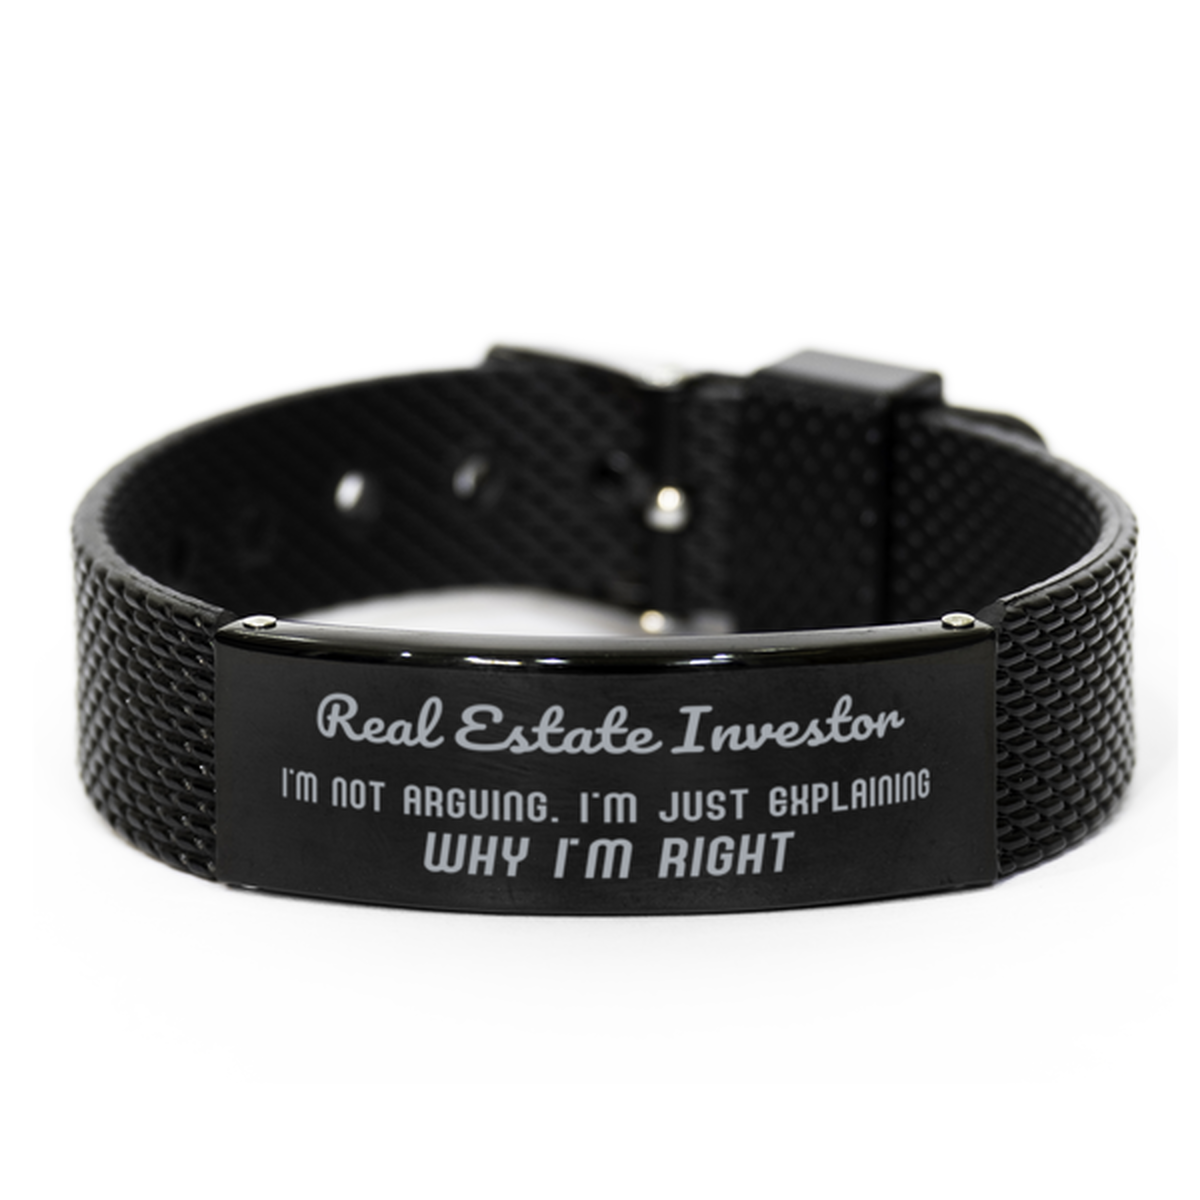 Real Estate Investor I'm not Arguing. I'm Just Explaining Why I'm RIGHT Black Shark Mesh Bracelet, Funny Saying Quote Real Estate Investor Gifts For Real Estate Investor Graduation Birthday Christmas Gifts for Men Women Coworker